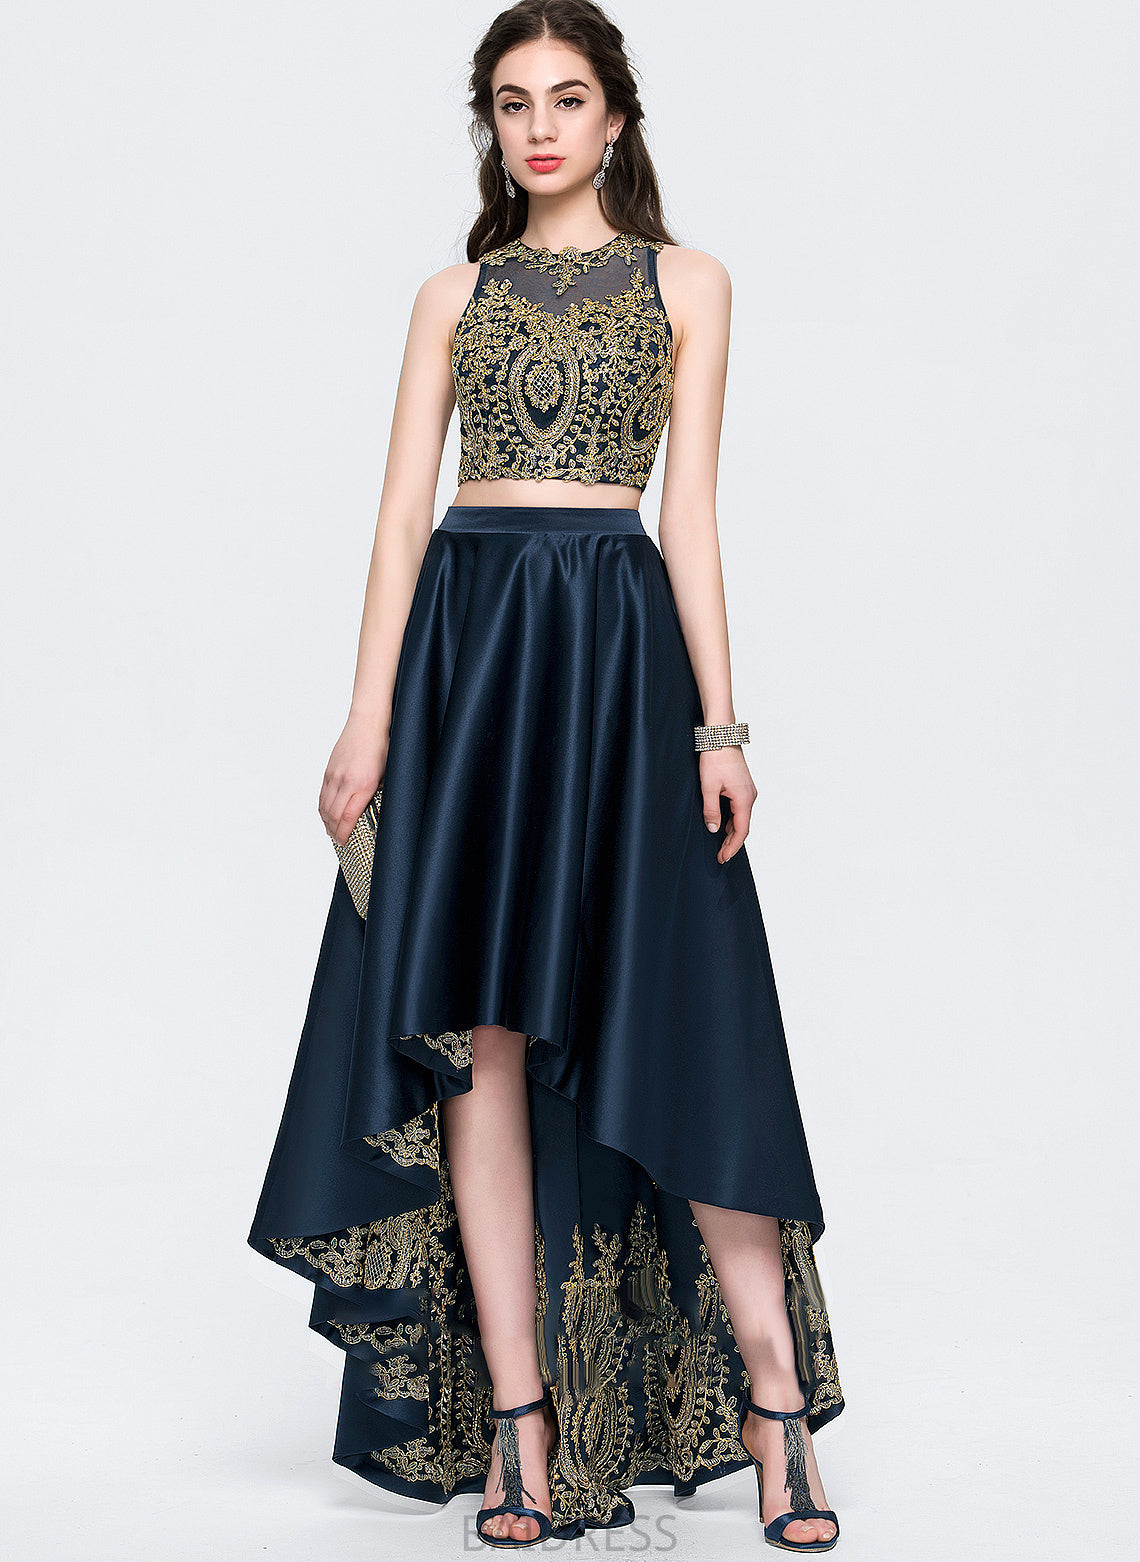 Beading Sequins With Asymmetrical A-Line Neck Scoop Satin Prom Dresses Gillian Lace